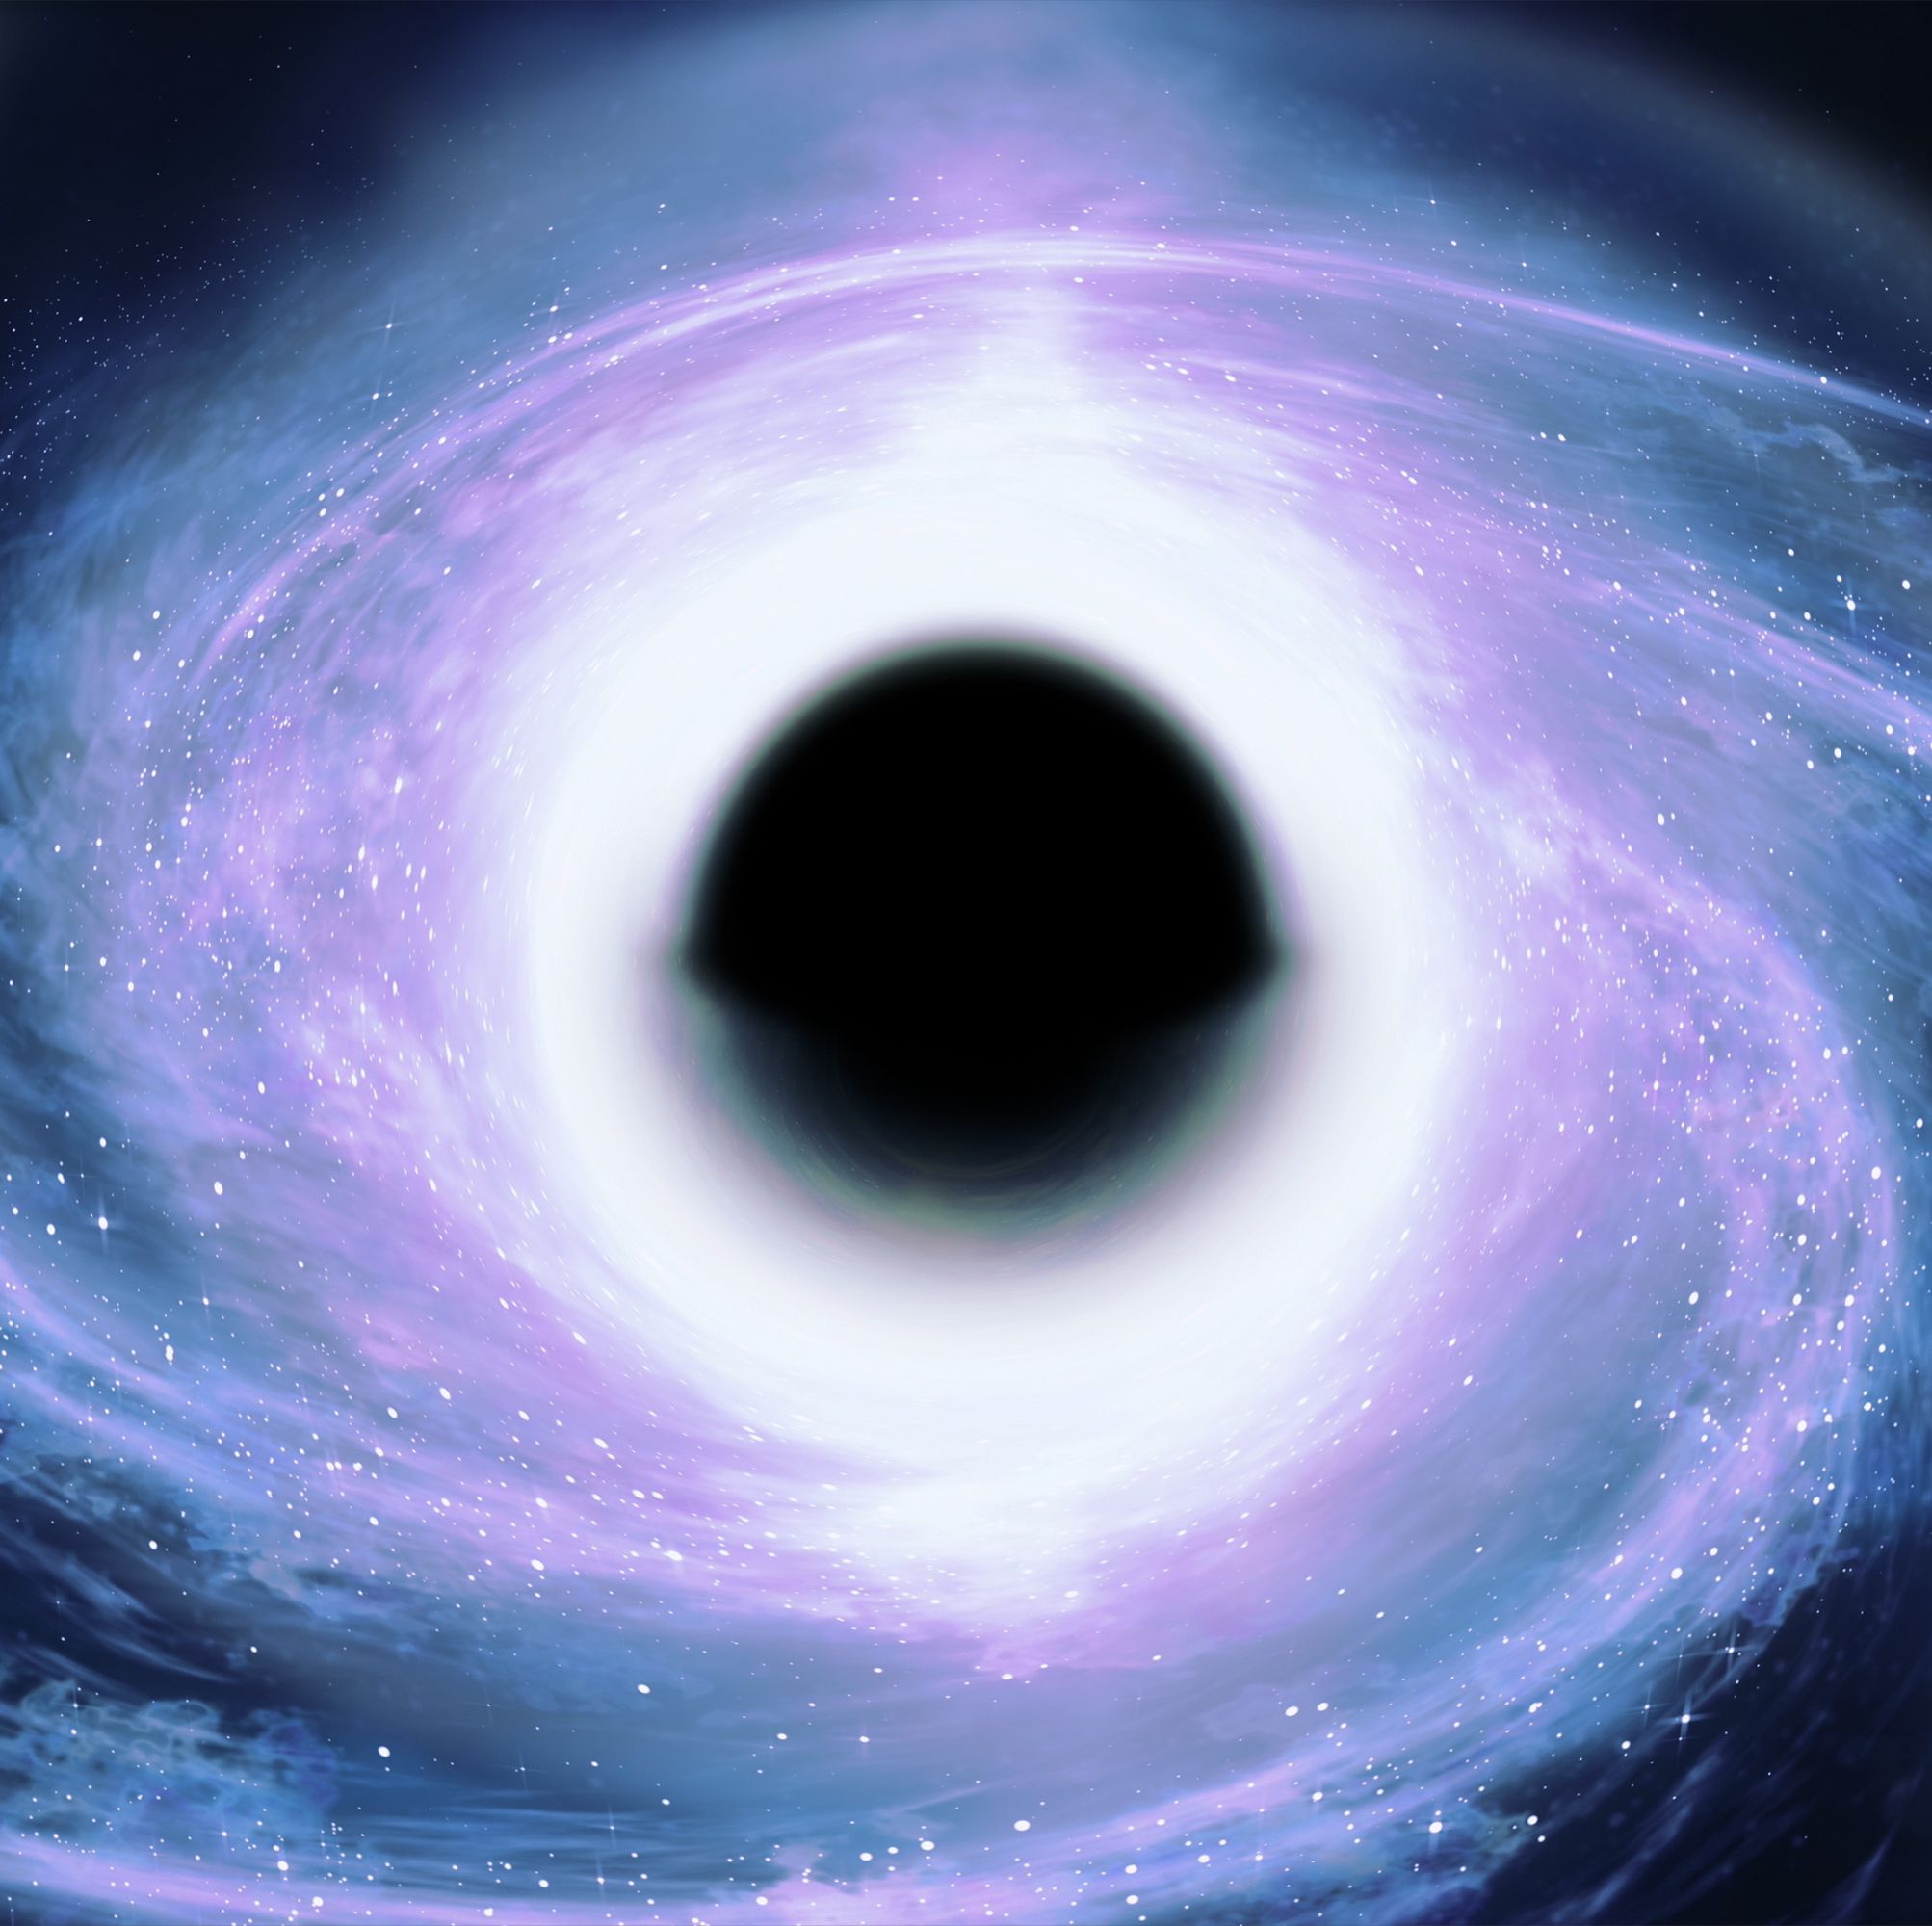 White Holes, the Opposite of Black Holes, Should Exist According to Physics. So Where Are They?